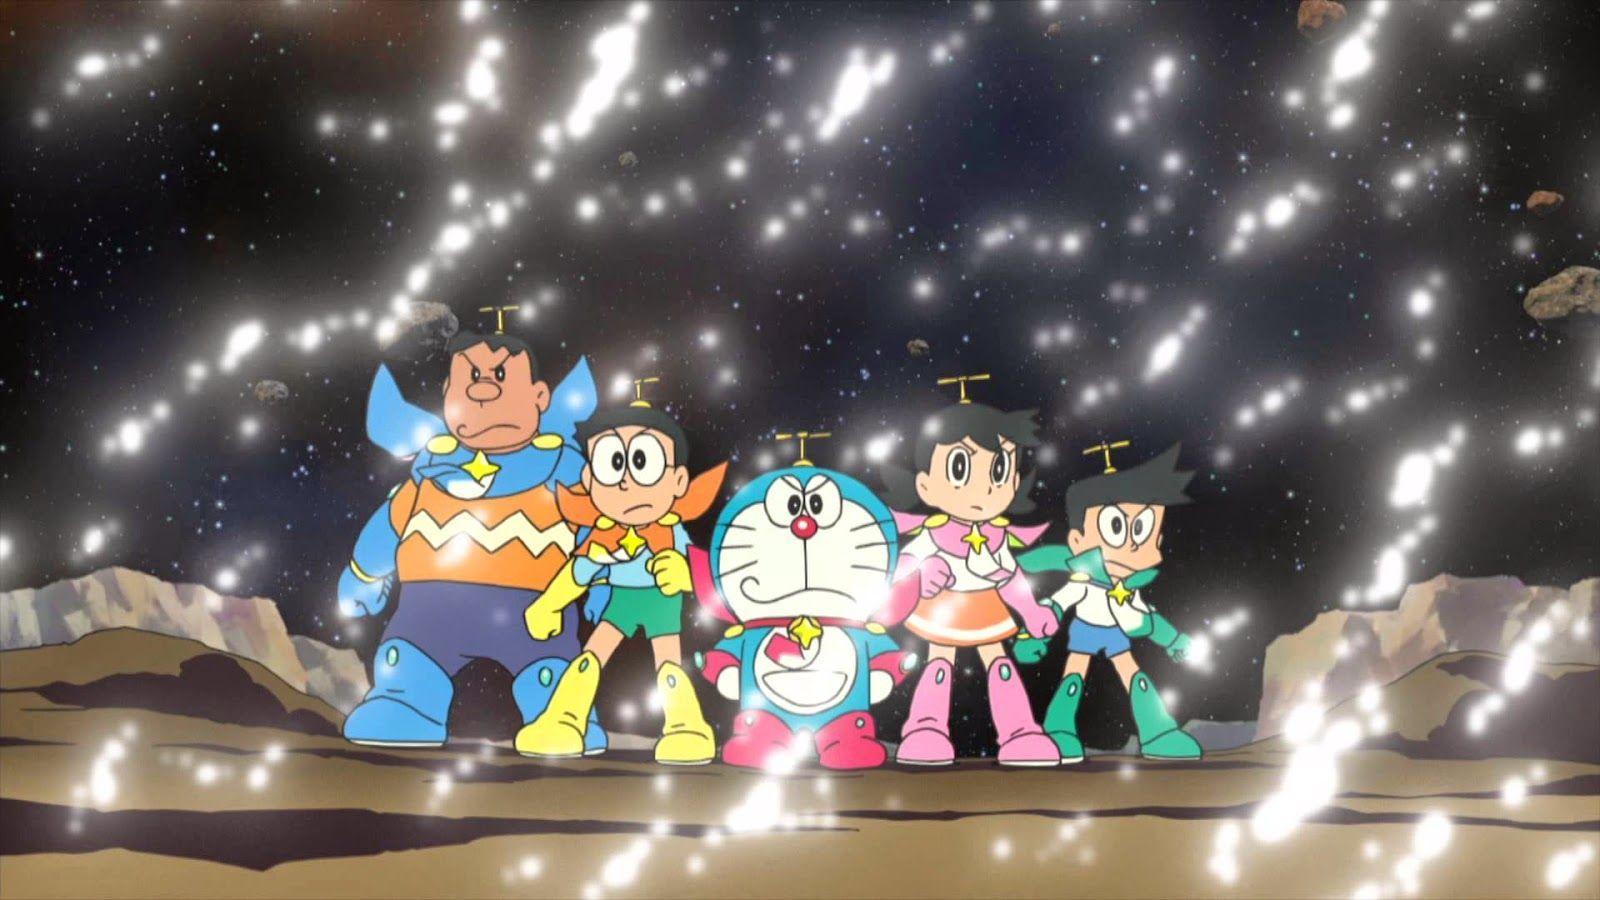 Doraemon And Friends Wallpapers 2015 - Wallpaper Cave